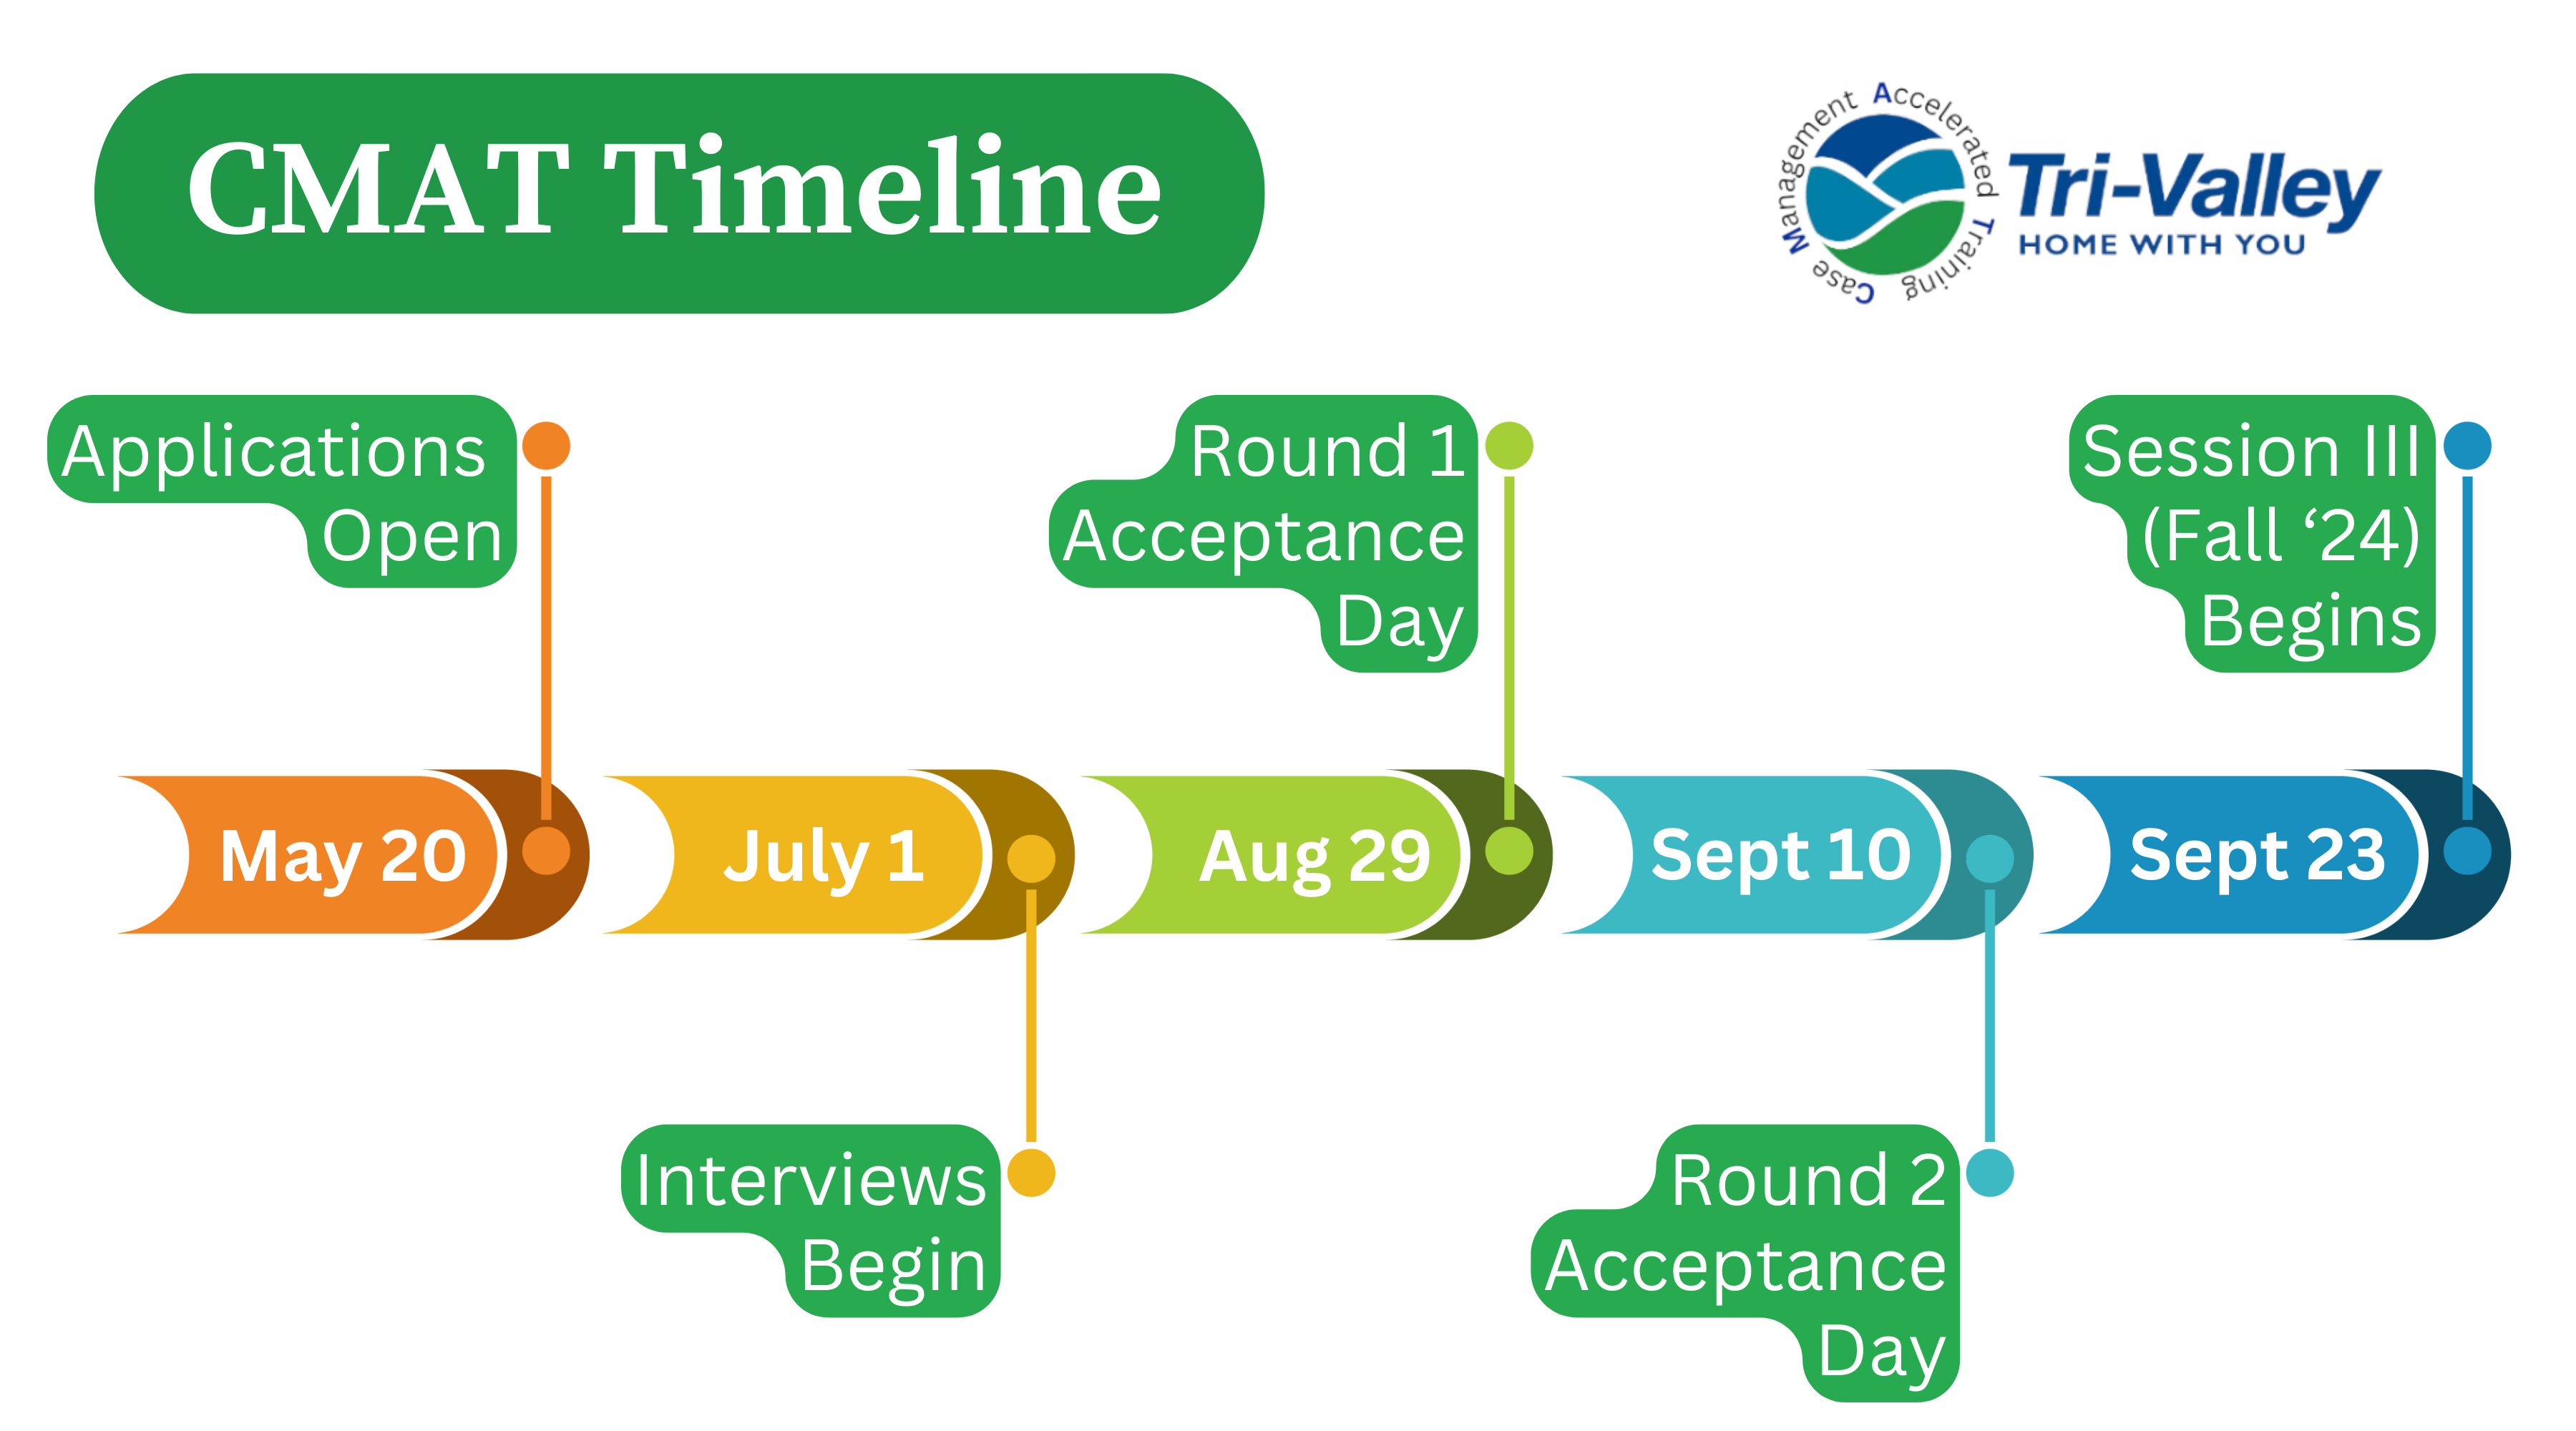 A Timeline for Session III (fall '24) of CMAT